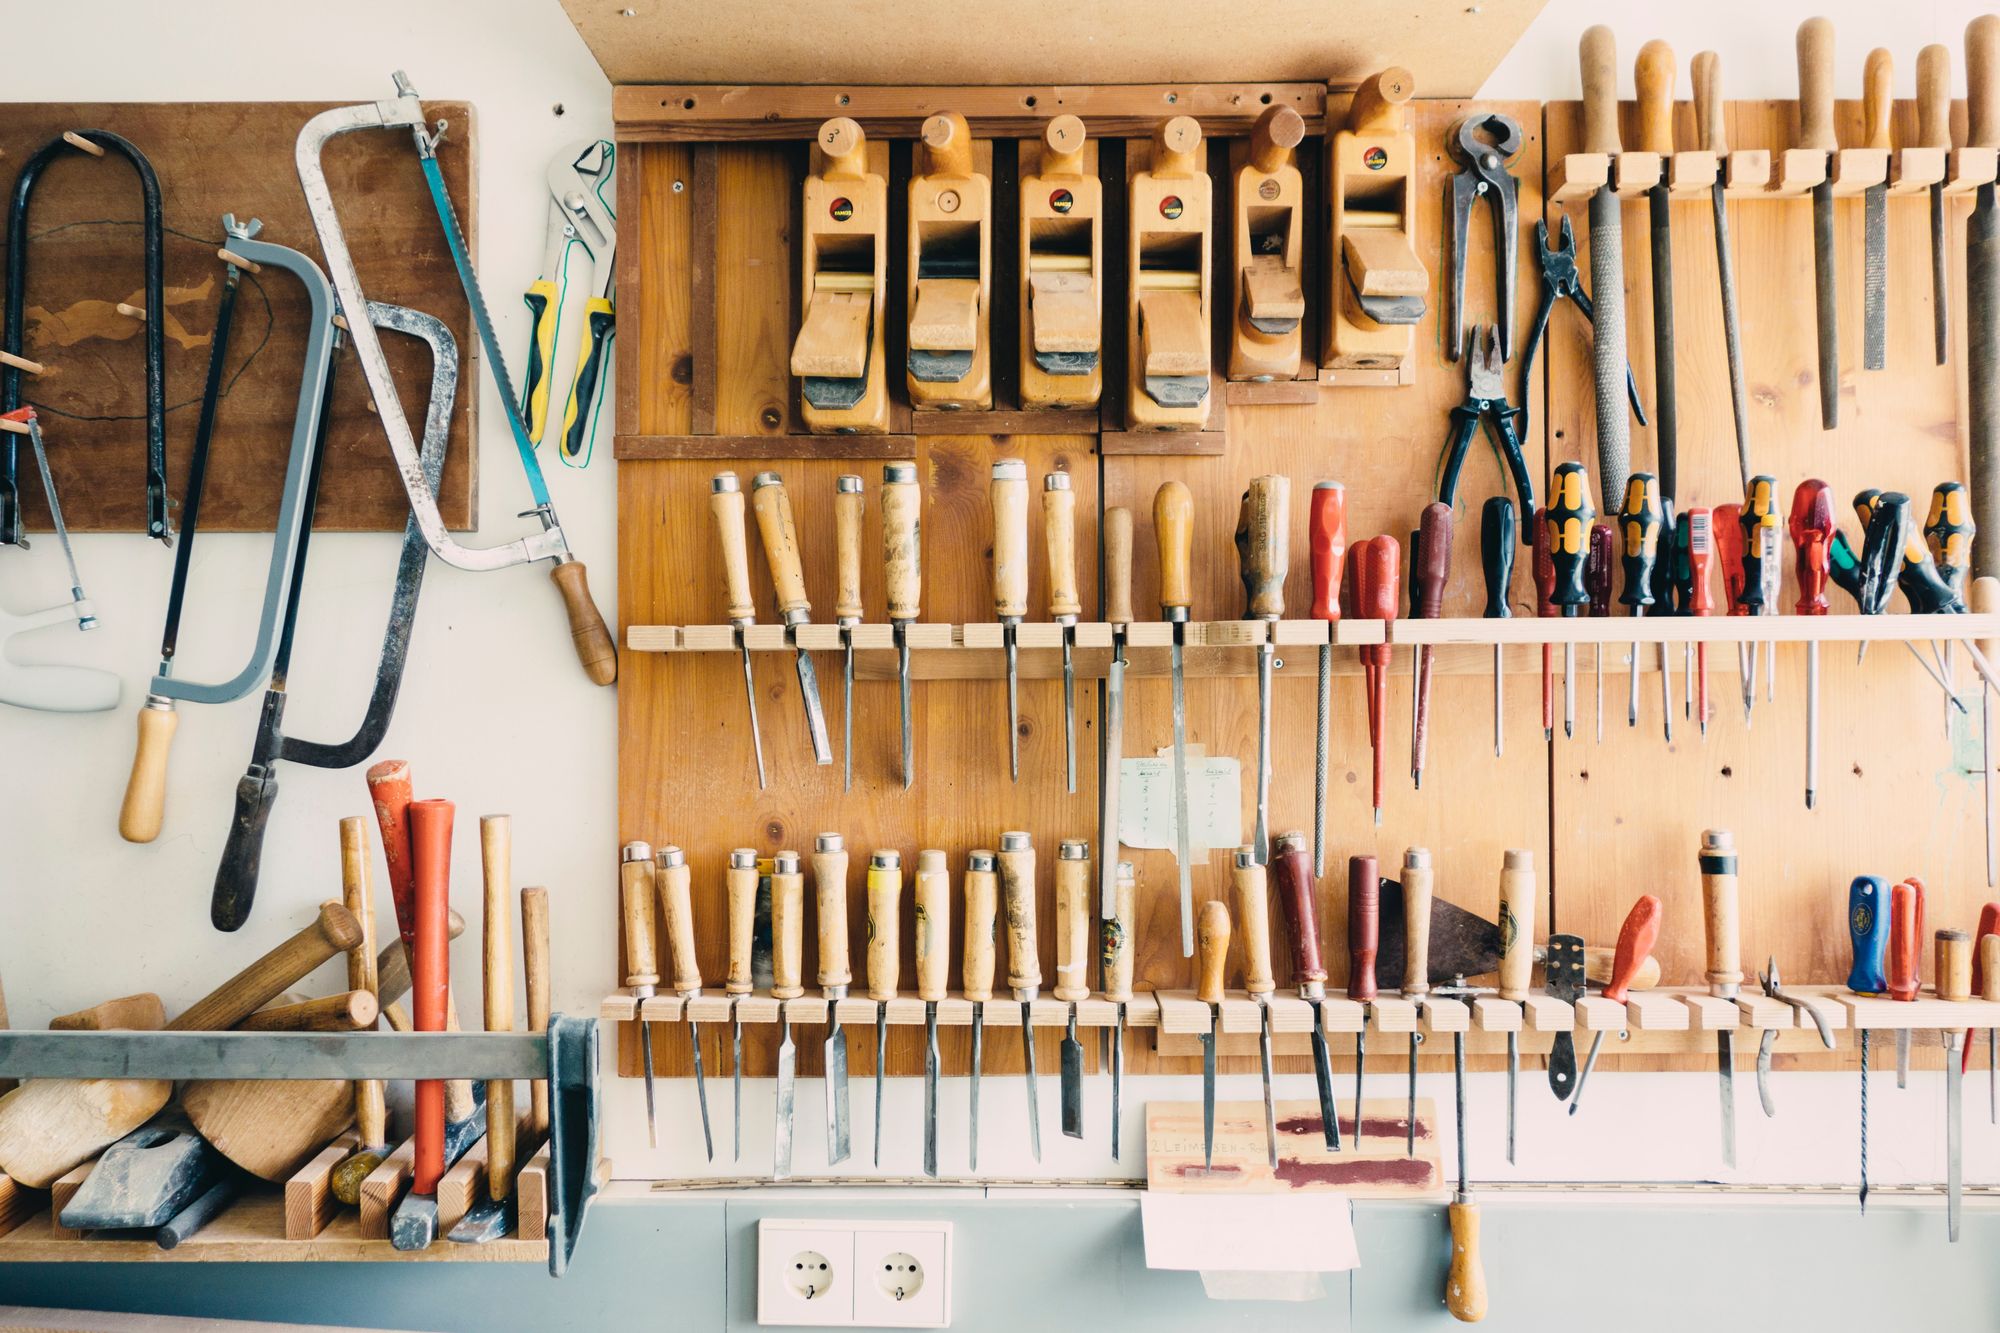 A garage or work space with a bunch of wood-working tools hanging on the wall